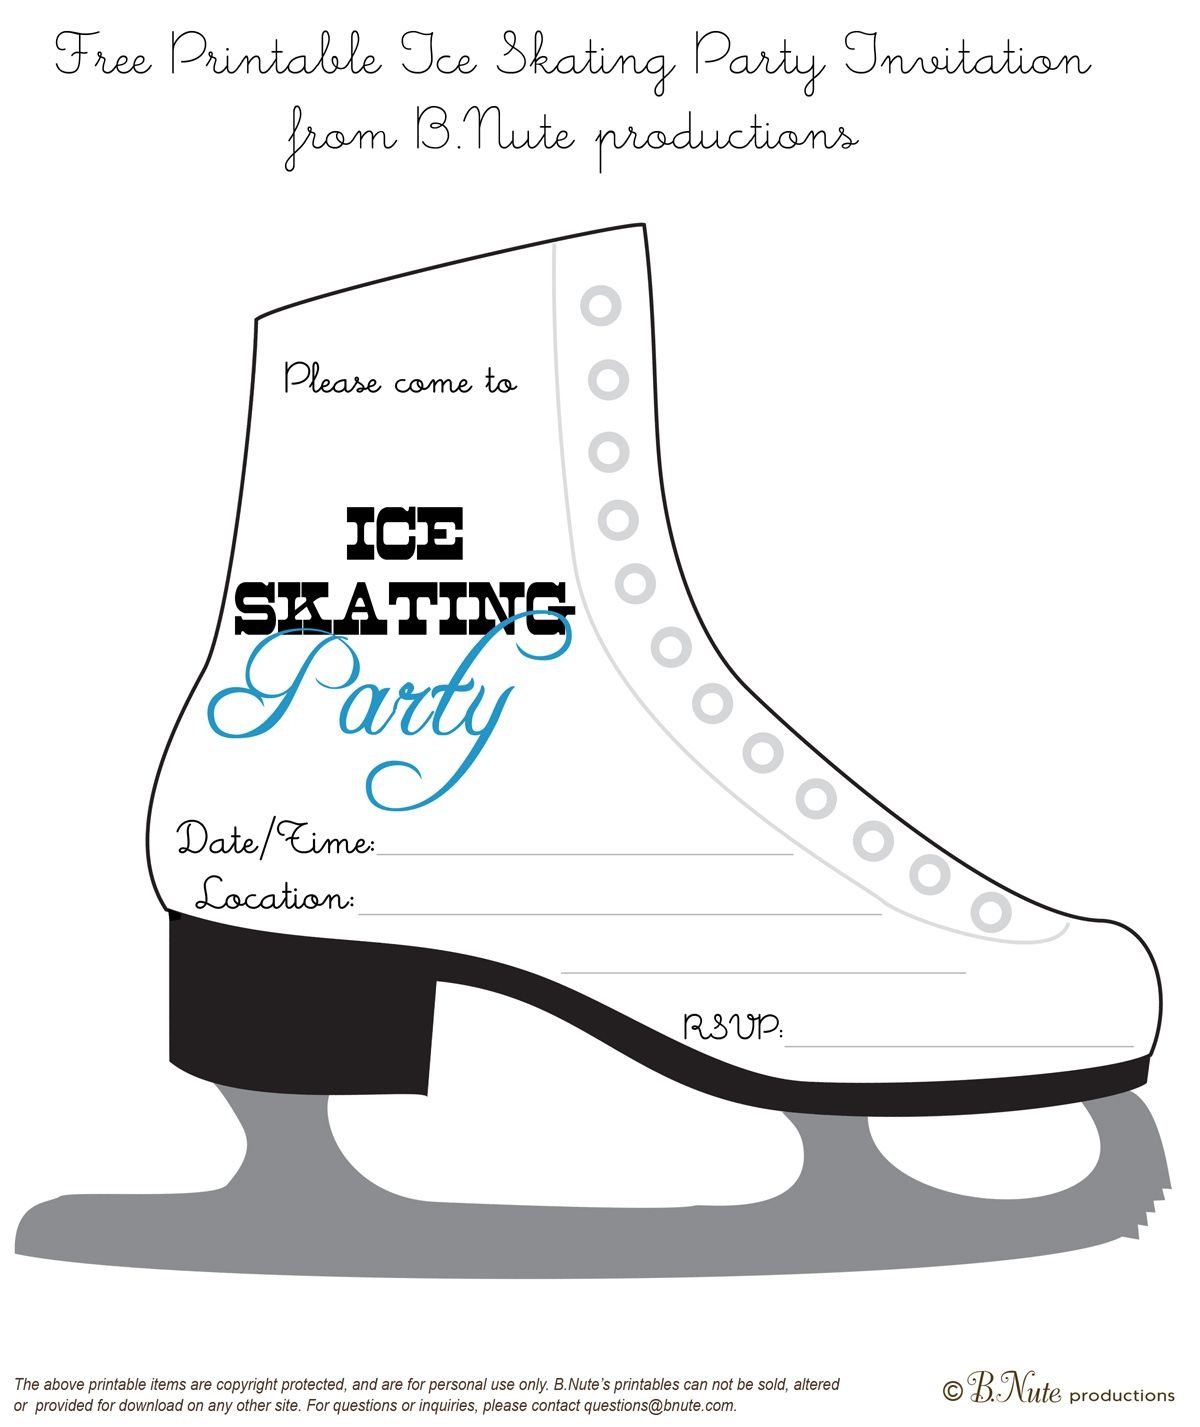 Bnute Productions: Free Printable Ice Skating Party Invitation - Free Printable Skating Invitations